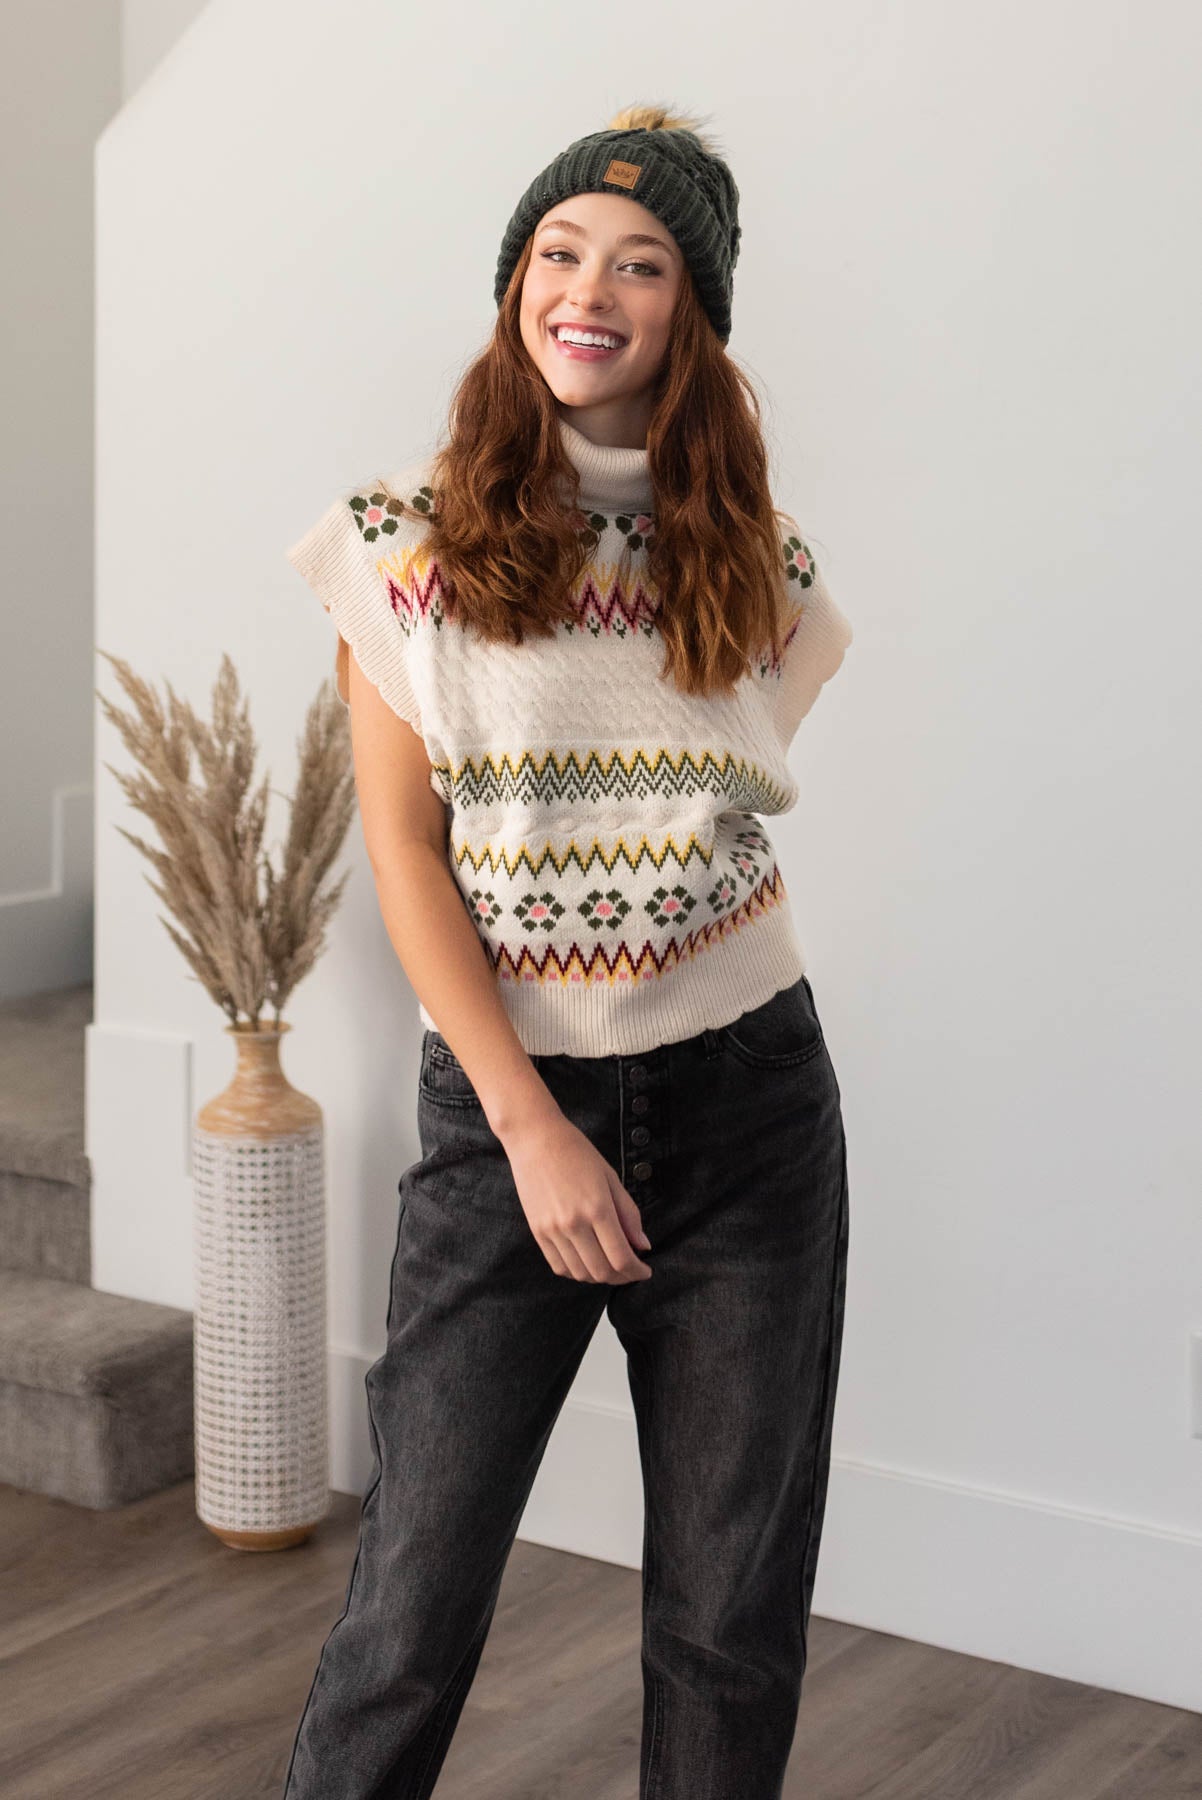 Turtle neck sweater vest with flowers